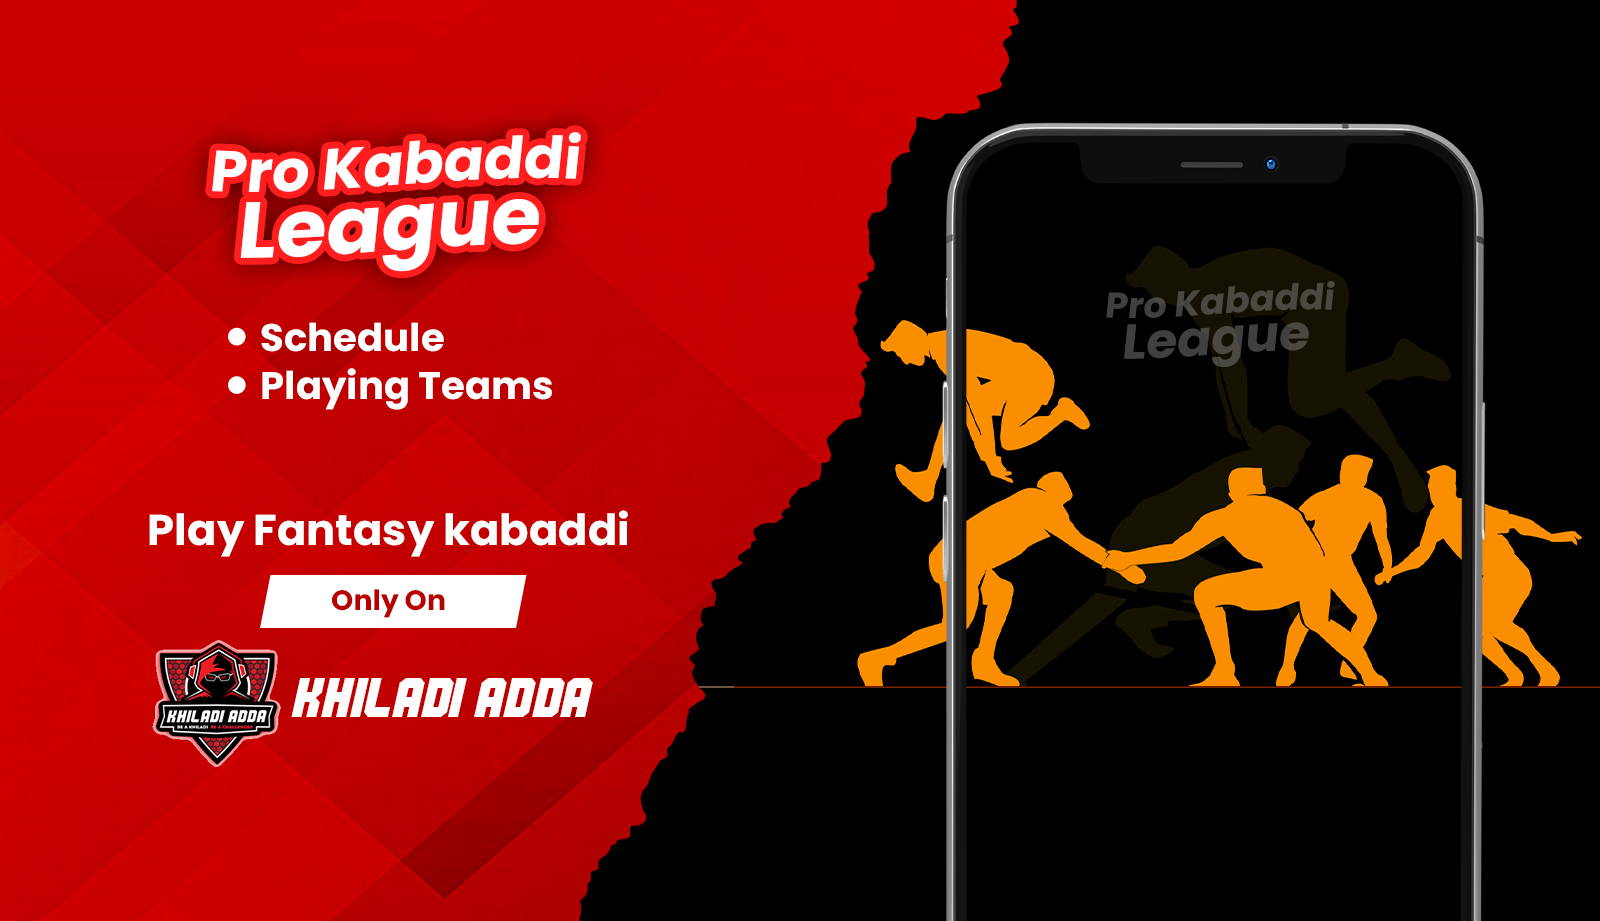 Pro-Kabaddi-League-Schedule-and-Playing-Teams